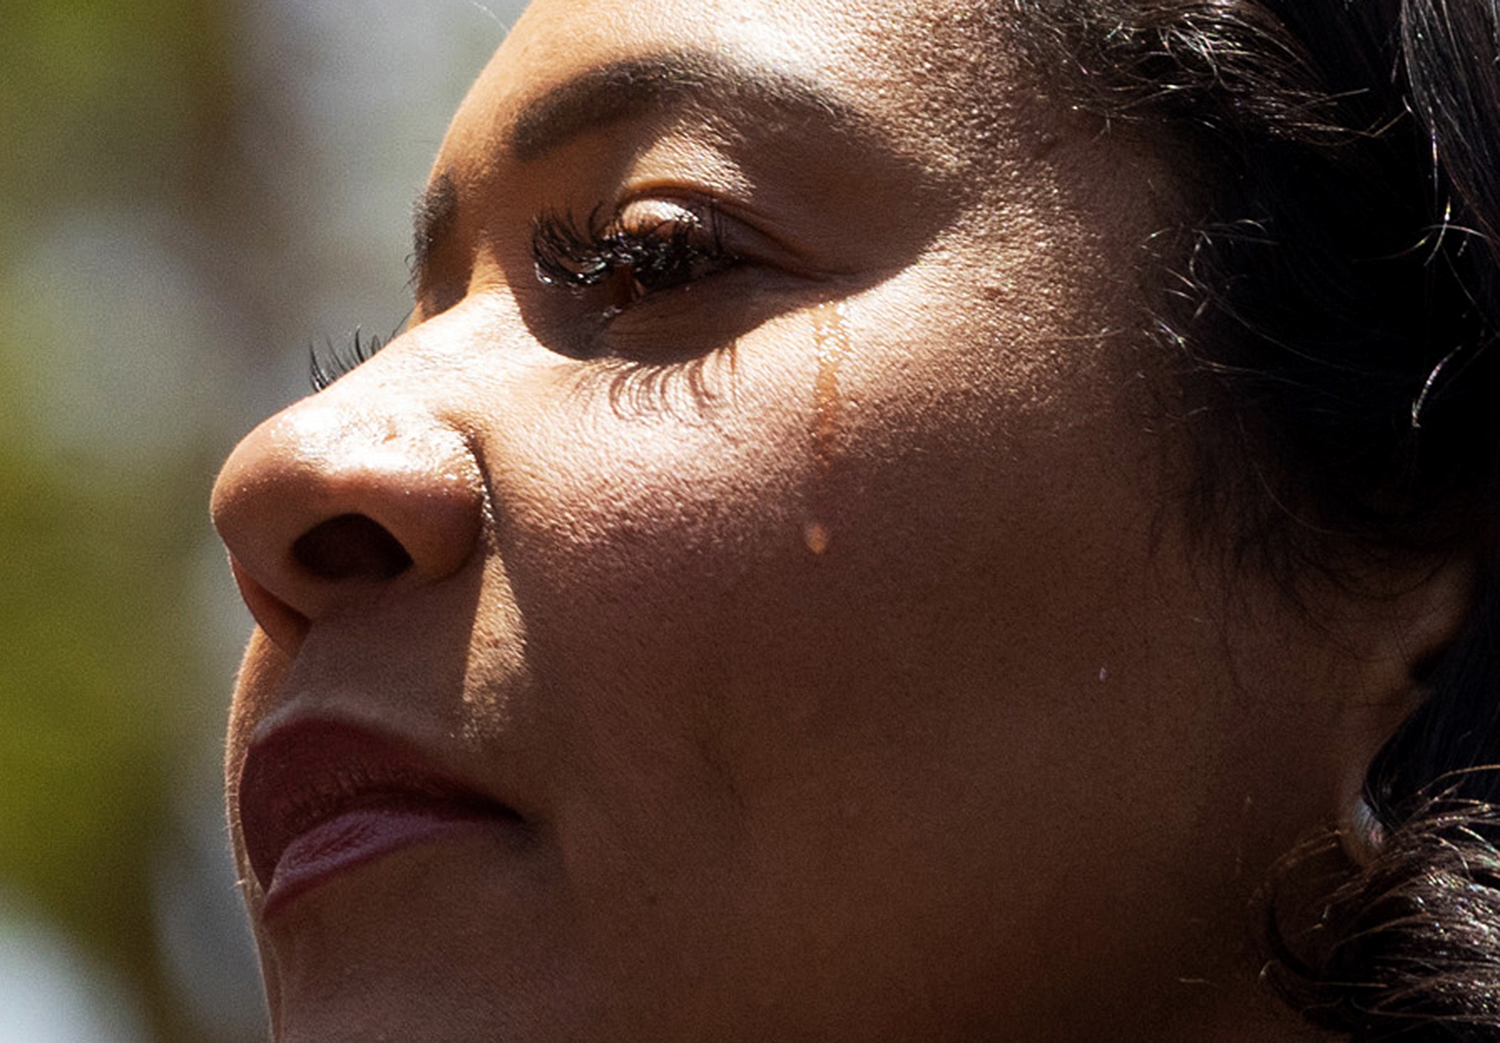 Mayor London Breed during an emotional public meeting at United Nations Plaza in San Francisco on May 23, 2023. The supervisors and Breed held the meeting at the plaza to discuss the deadly drug overdose crisis.